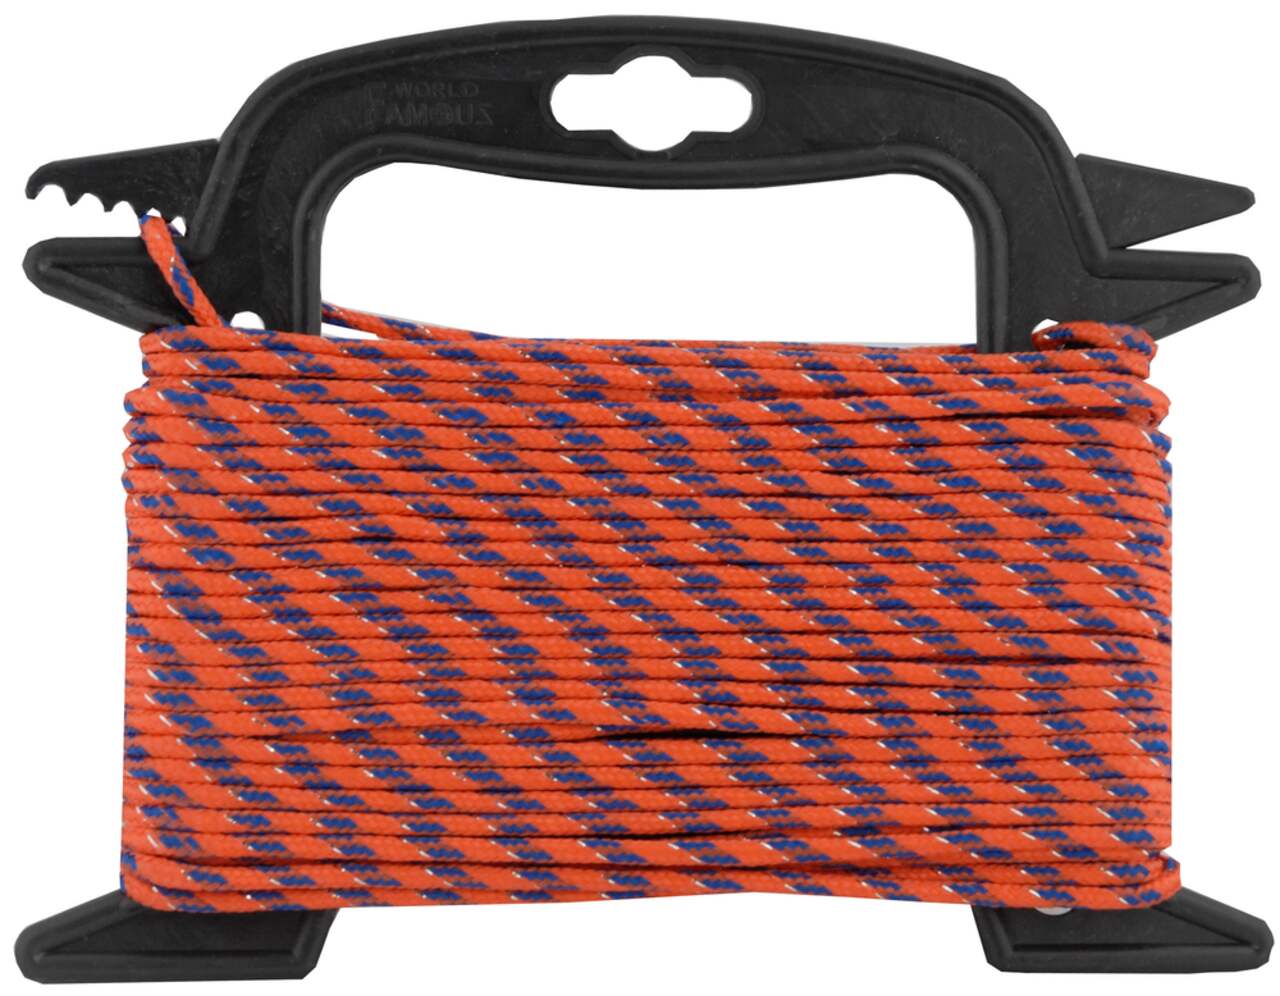 Outbound Multi-Purpose Utility Paracord Rope w/ Winder For Camping